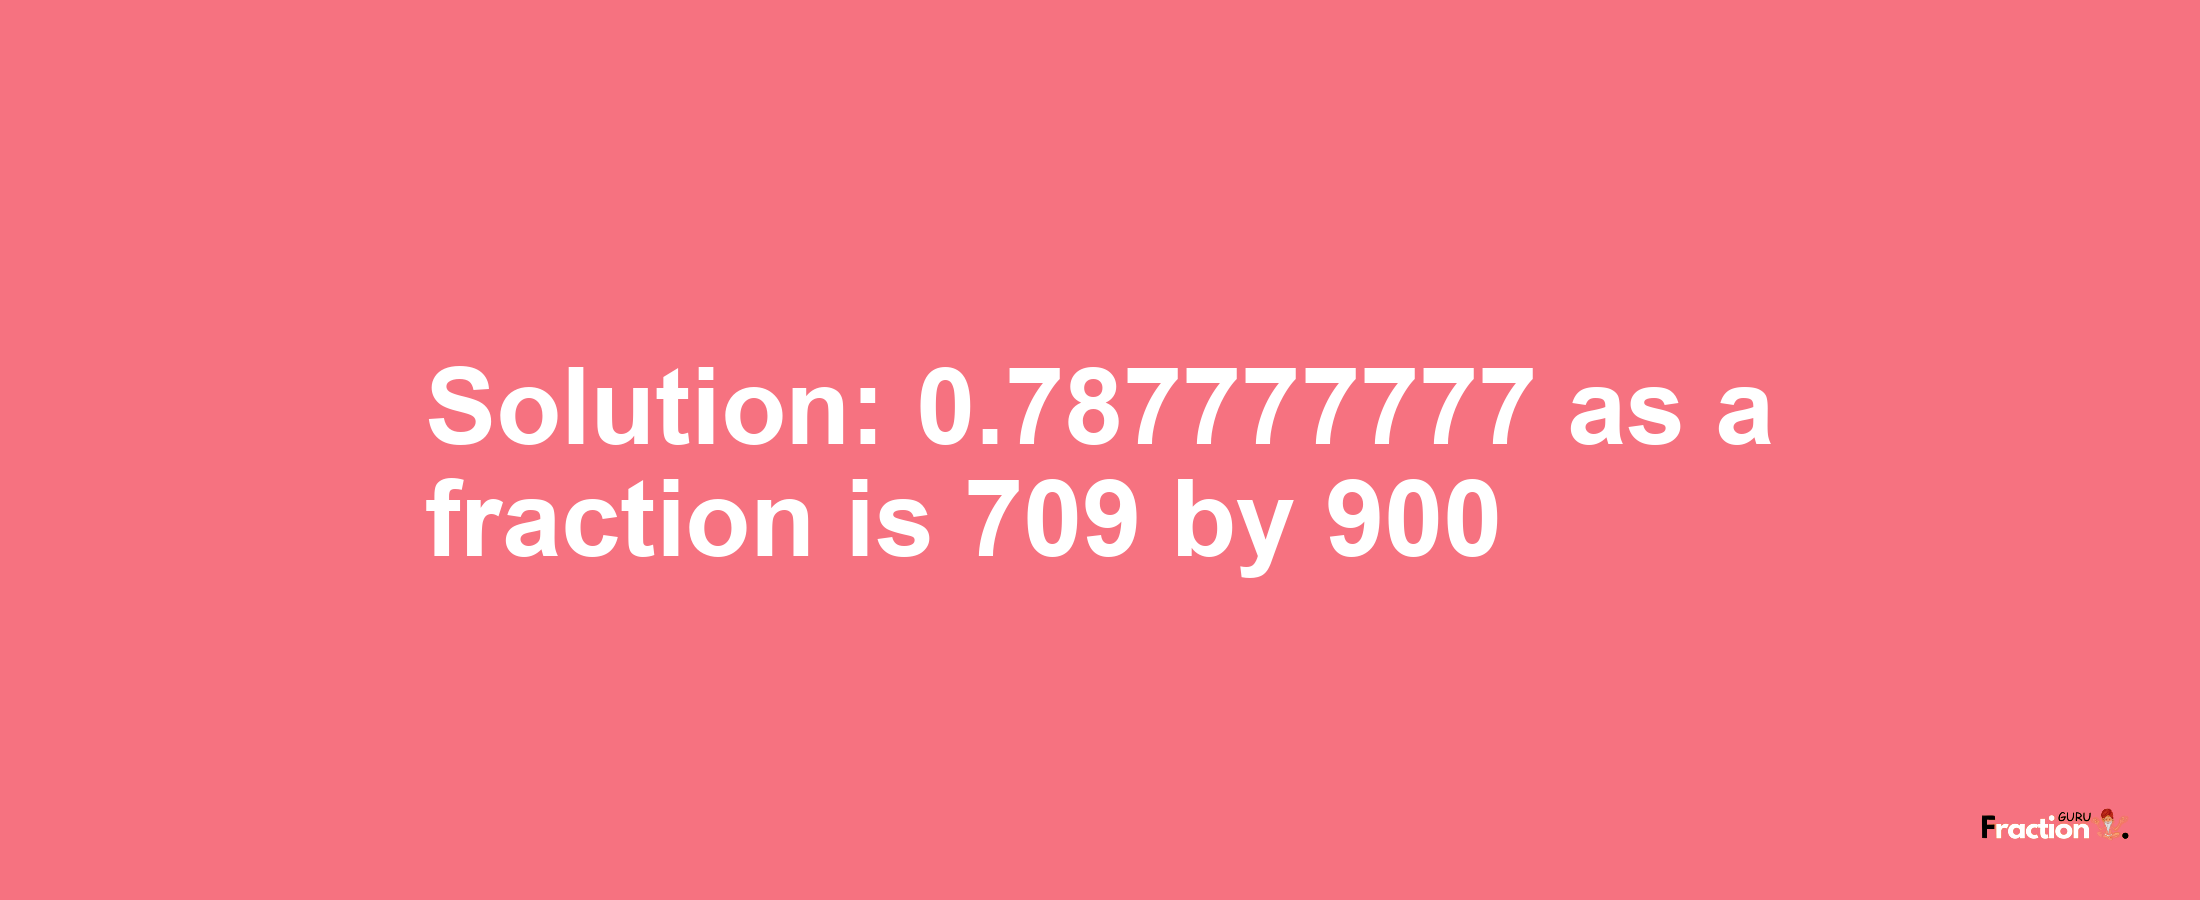 Solution:0.787777777 as a fraction is 709/900